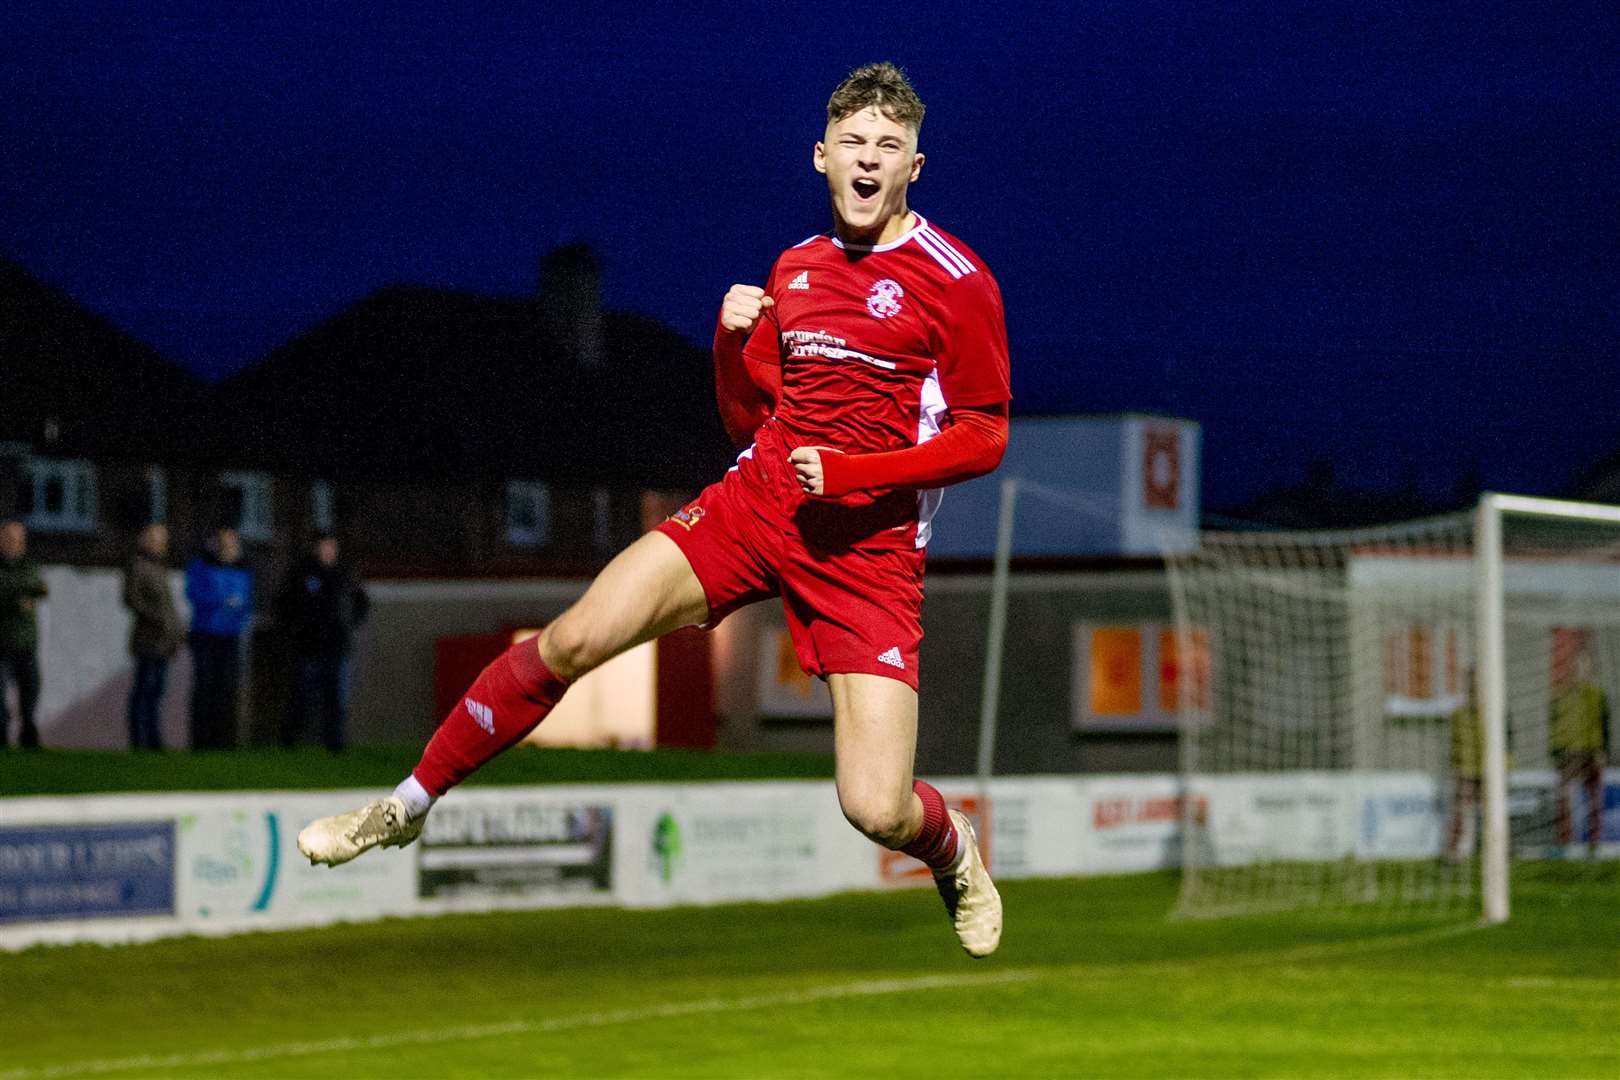 The joy of scoring a goal for Lossiemouth hits Brodie Allen.  Photo: Daniel Forsyth.